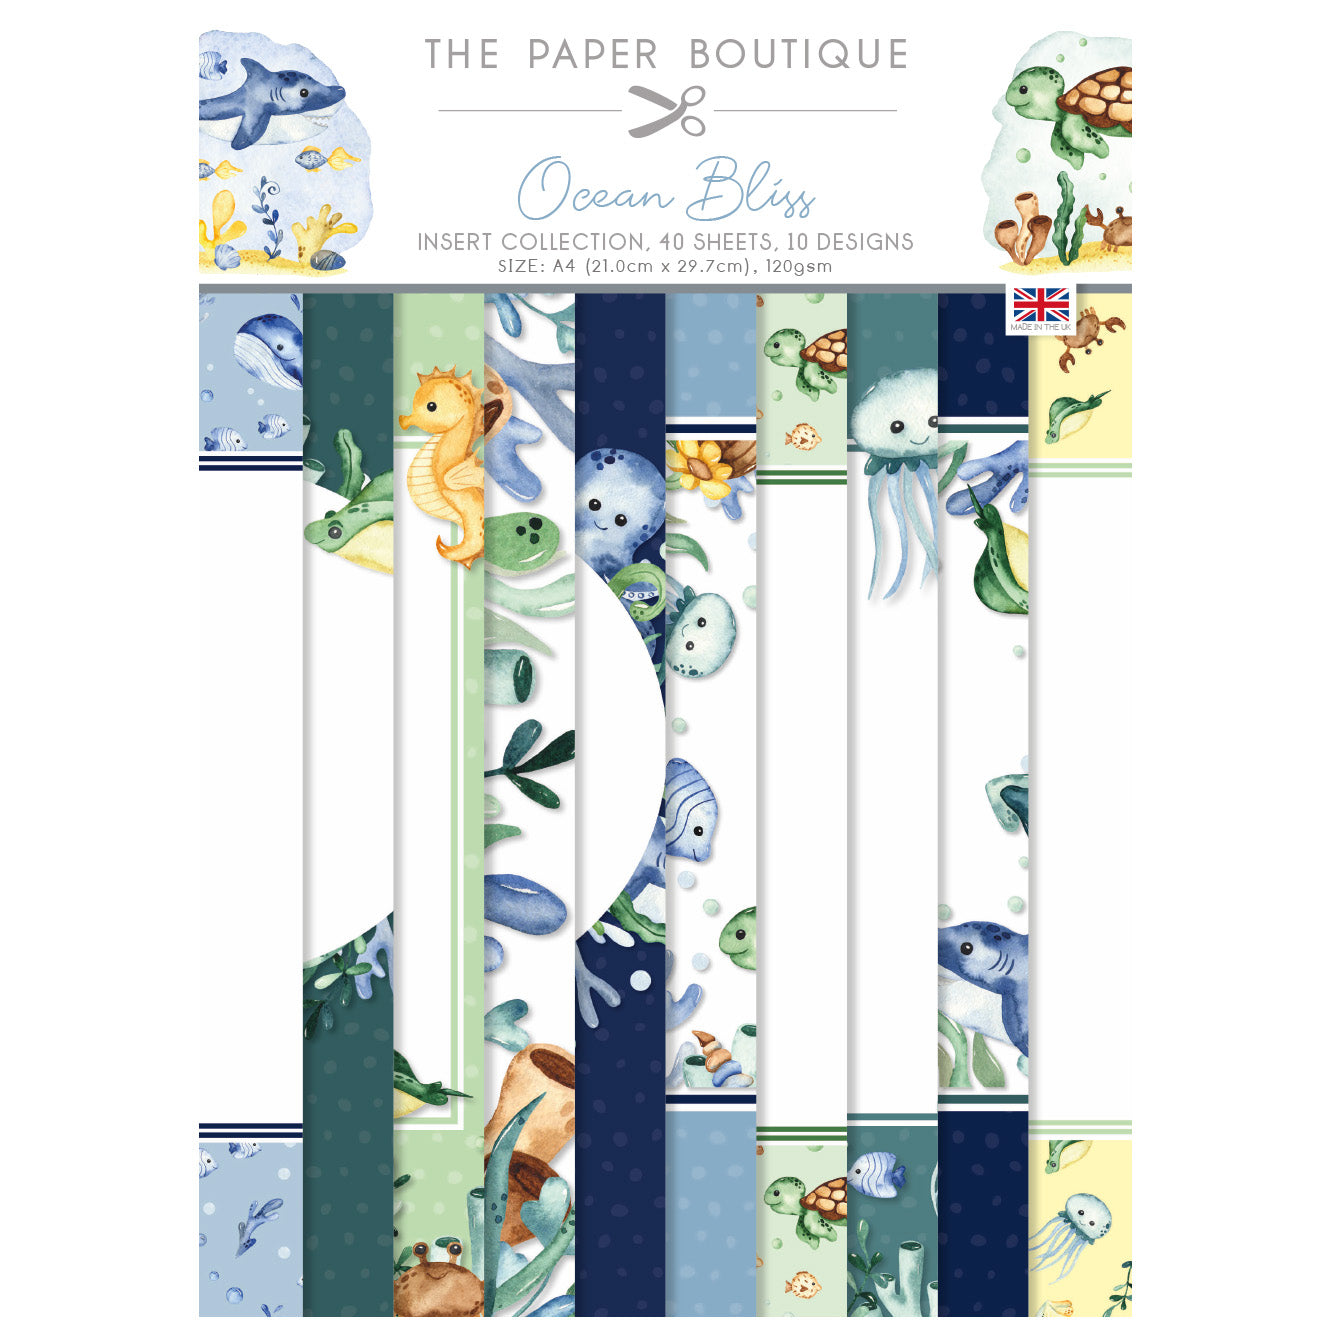 The Paper Boutique Ocean Bliss Insert Collection